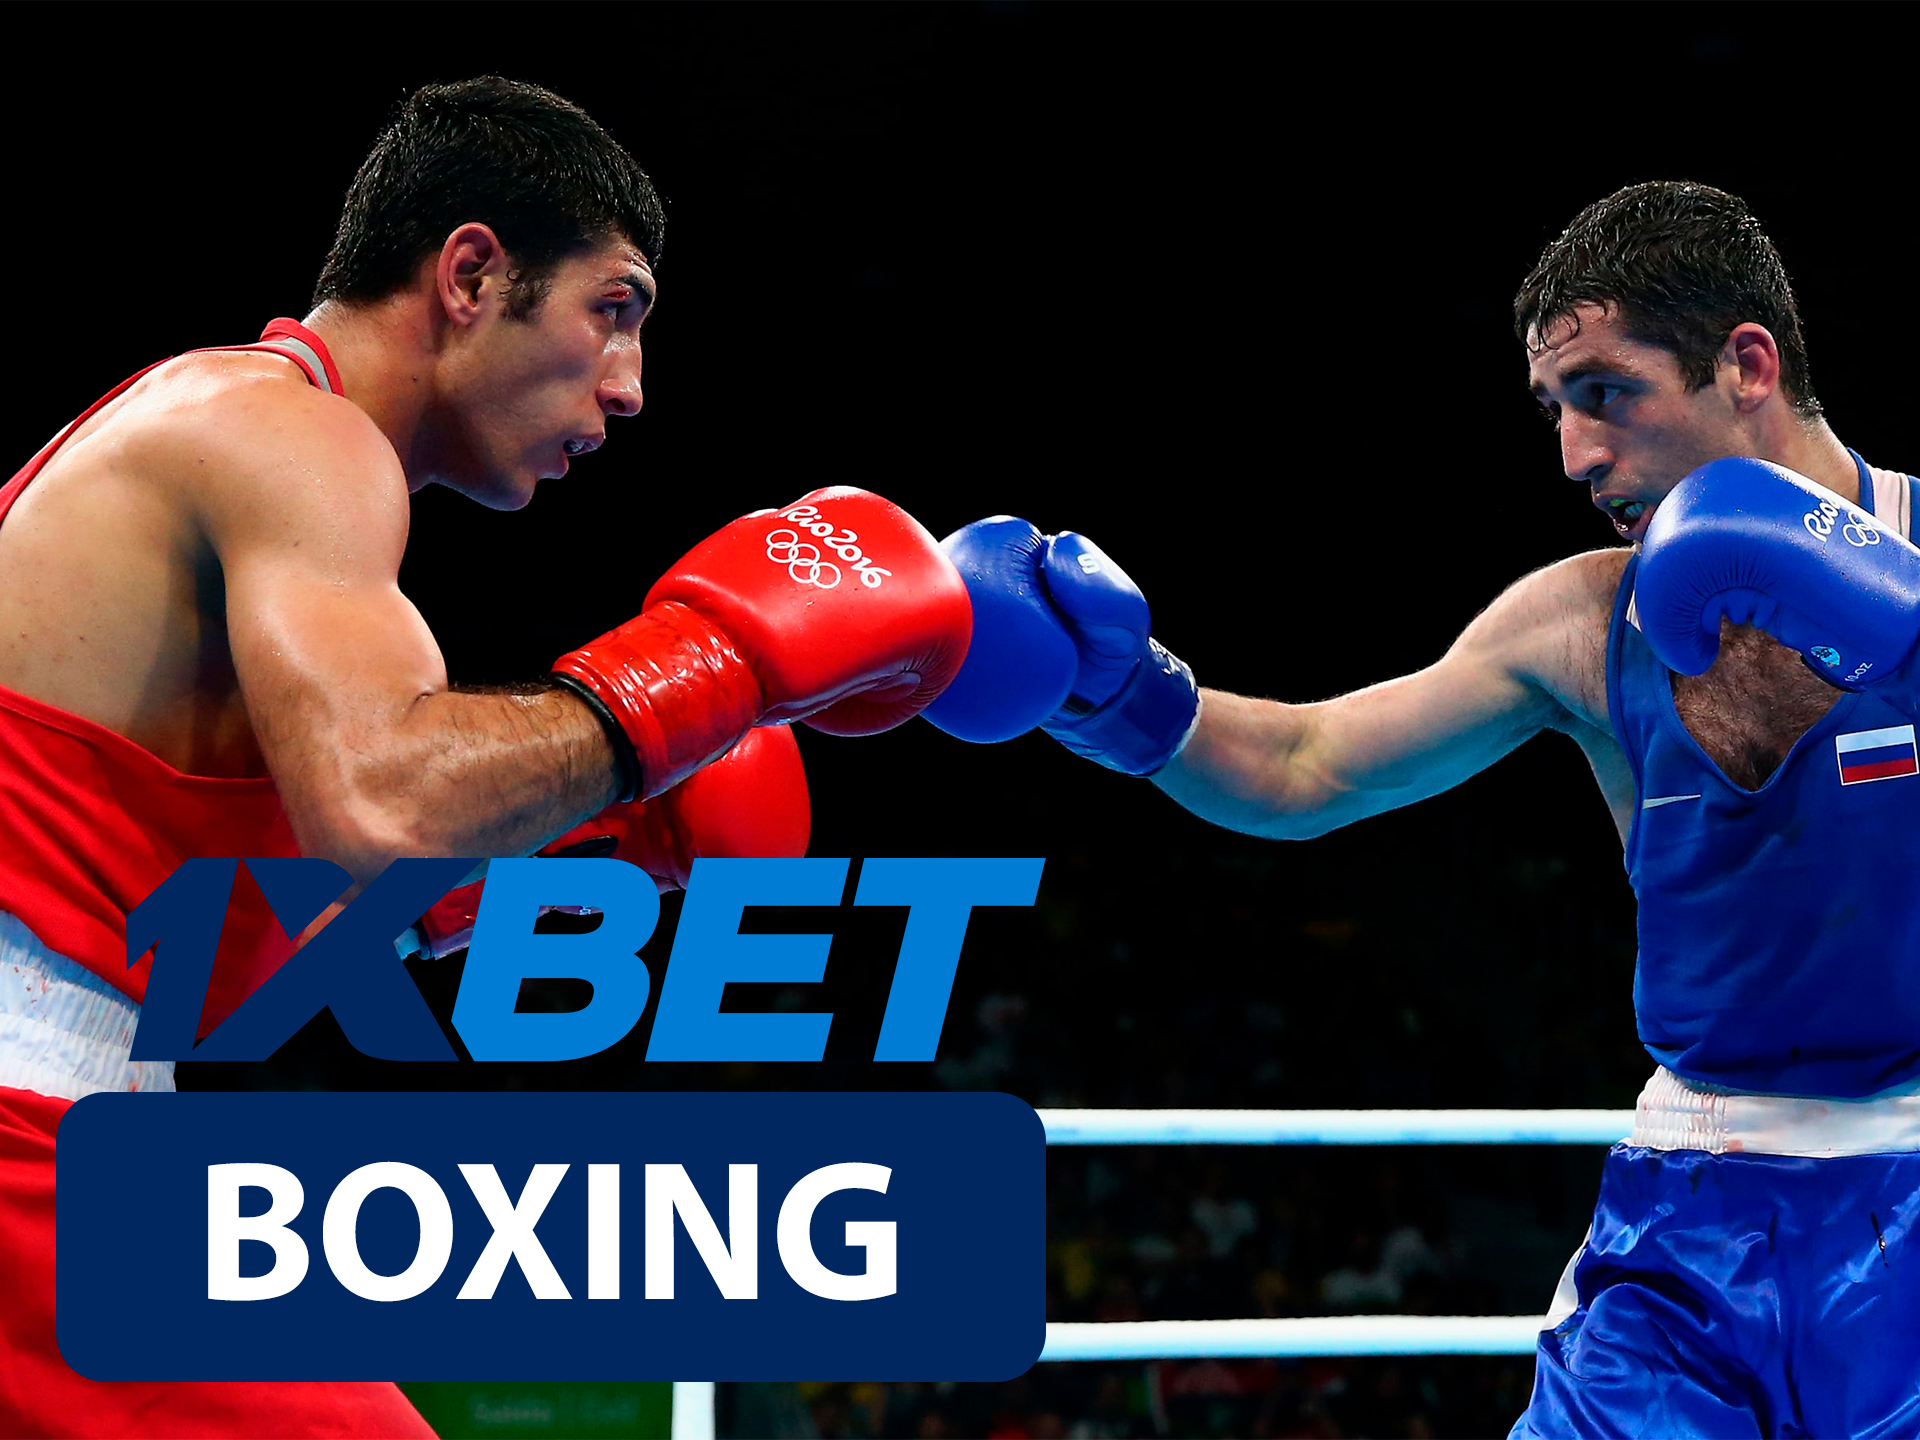 Start betting on boxing with 1xBet.